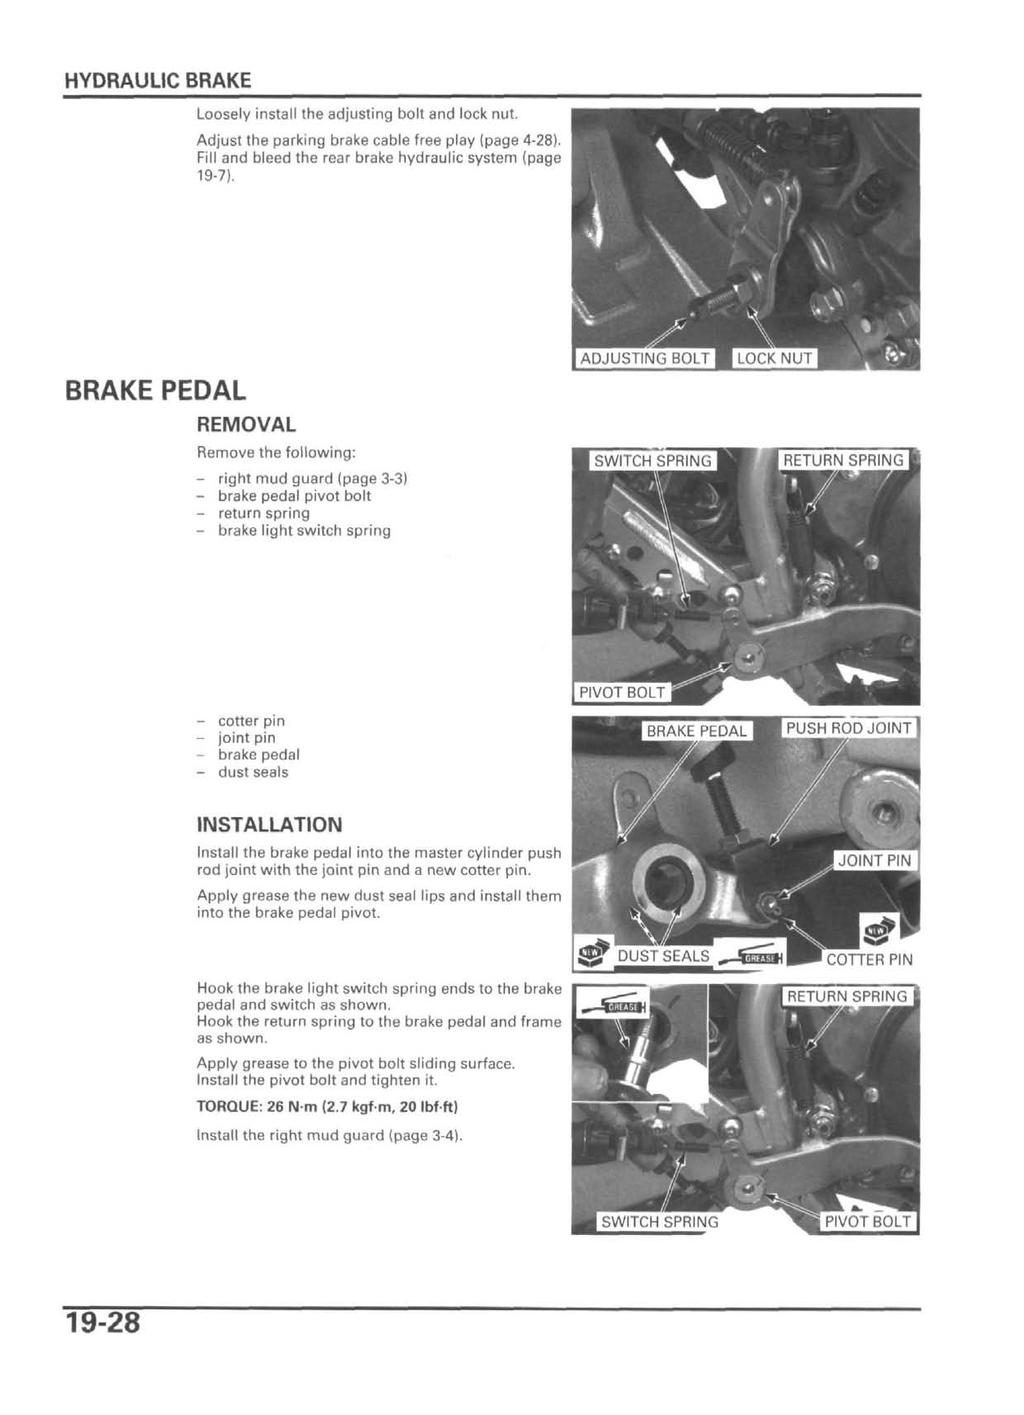 Loosely install the adjusting bolt and lock nut. Adjust the parking brake cable free play (page 4-28). Fill and bleed the rear brake hydraulic system (page 19-7).